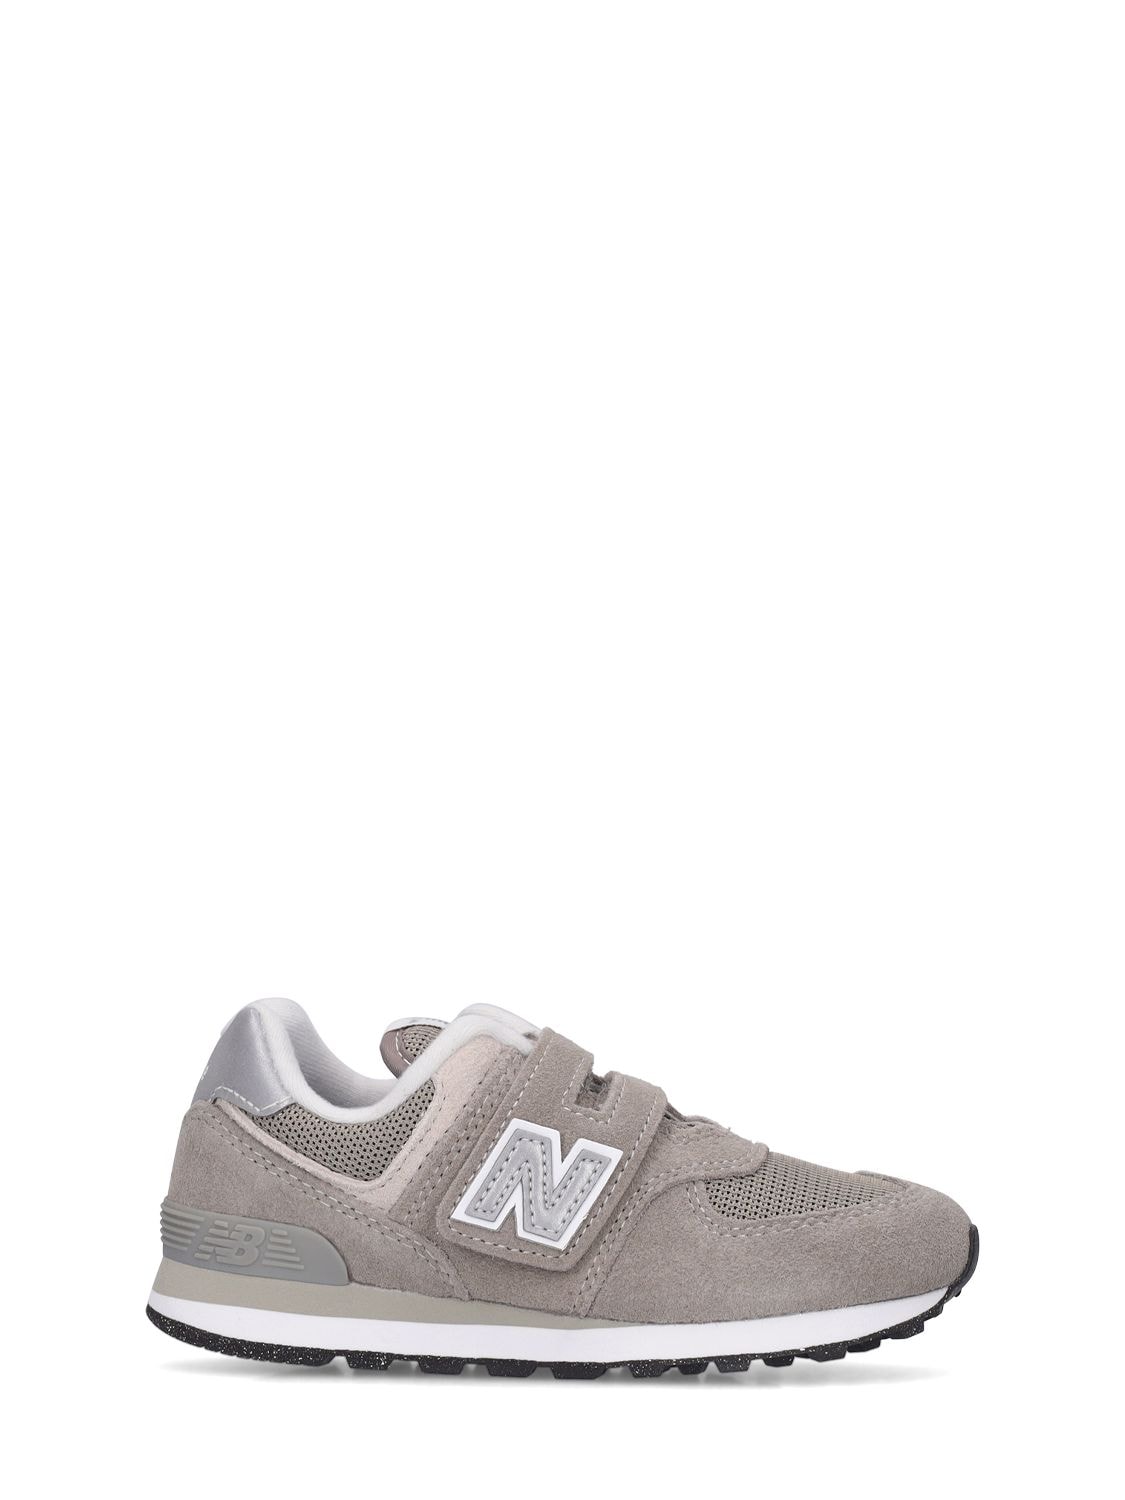 NEW BALANCE 574 LEATHER & MESH STRAP SNEAKERS